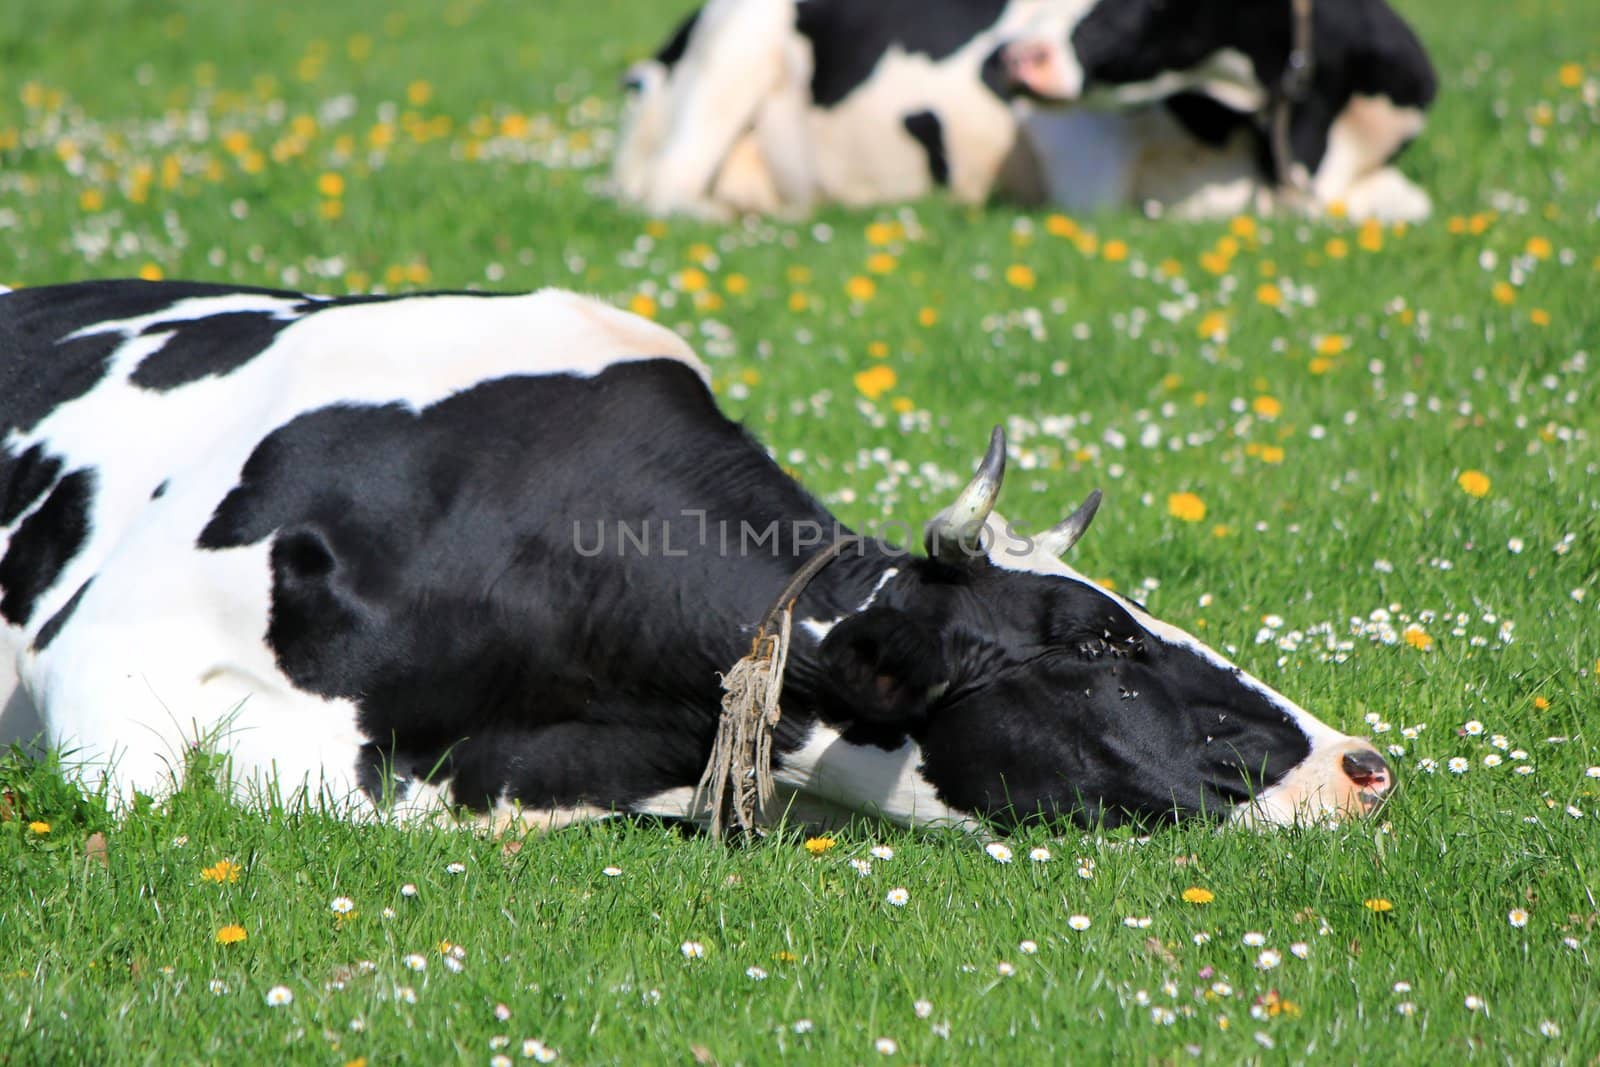 Black and white famous cow of Fribourg canton, Switzerland, resting lying in a meadow of green grass and flowers